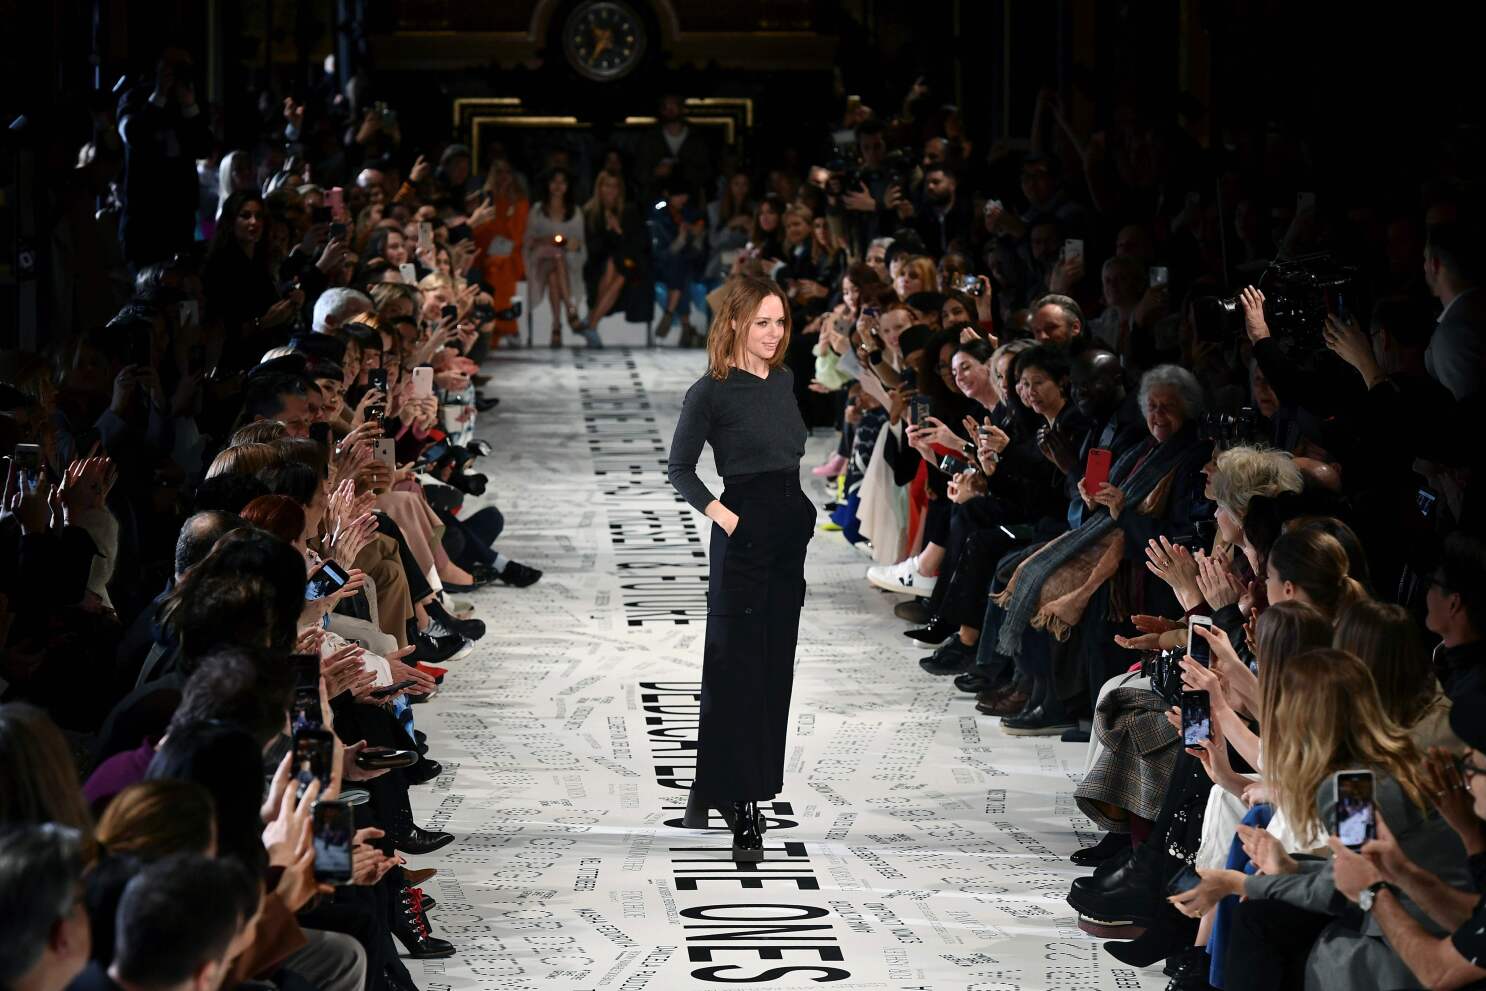 Stella McCartney is pushing for more regulation in the fashion industry